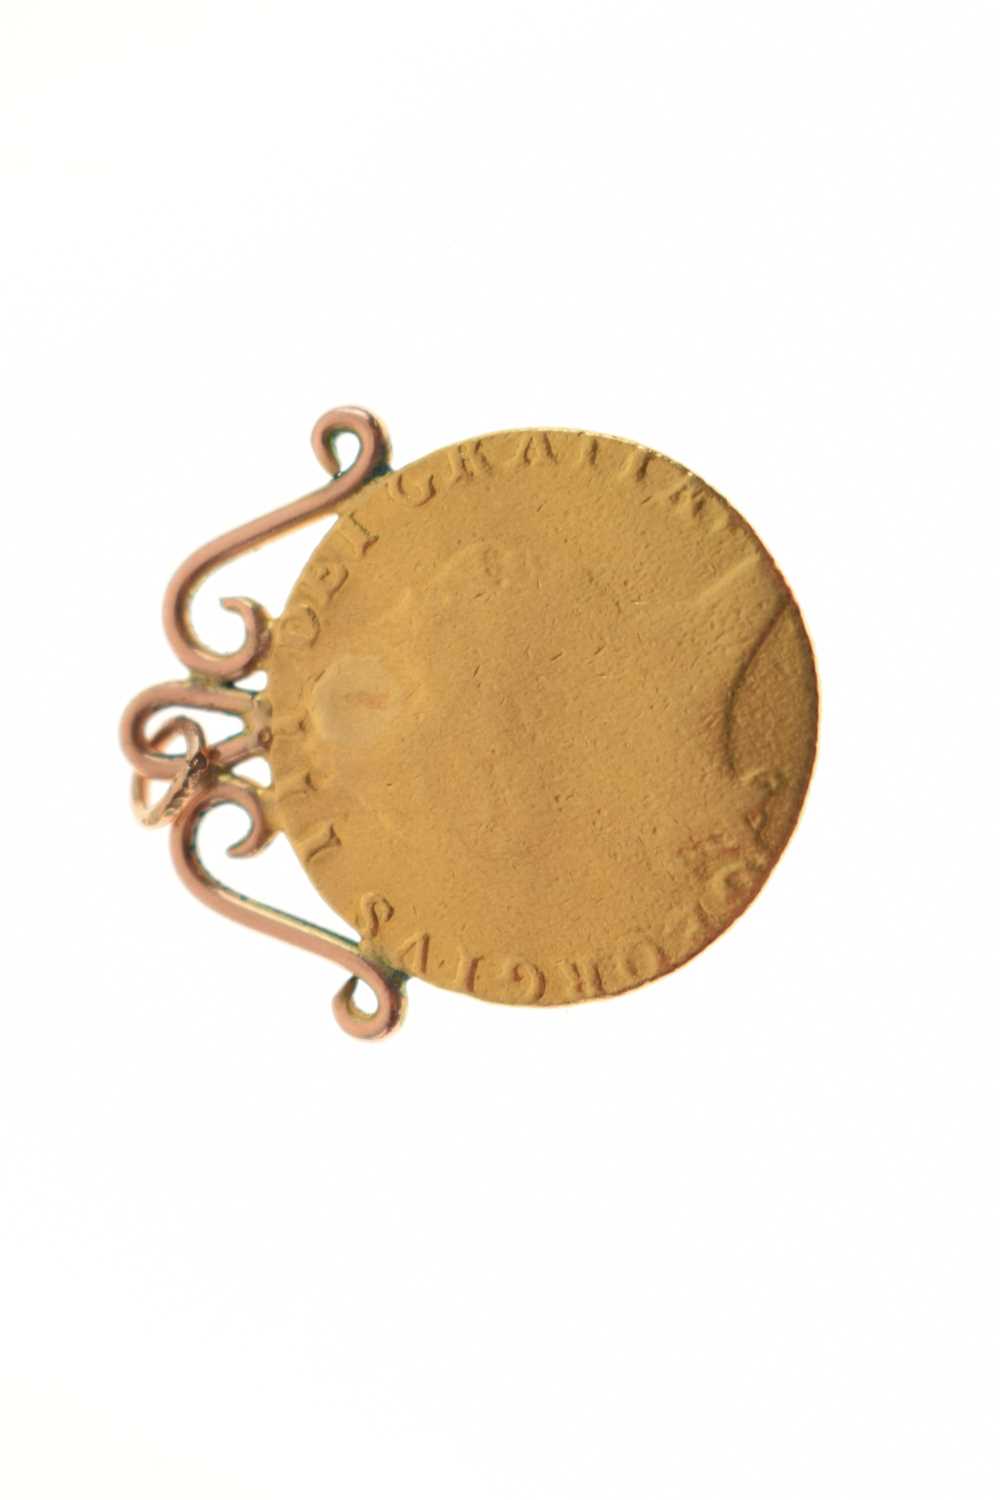 George III gold guinea, possibly 1794, with soldered suspension loop - Image 2 of 4